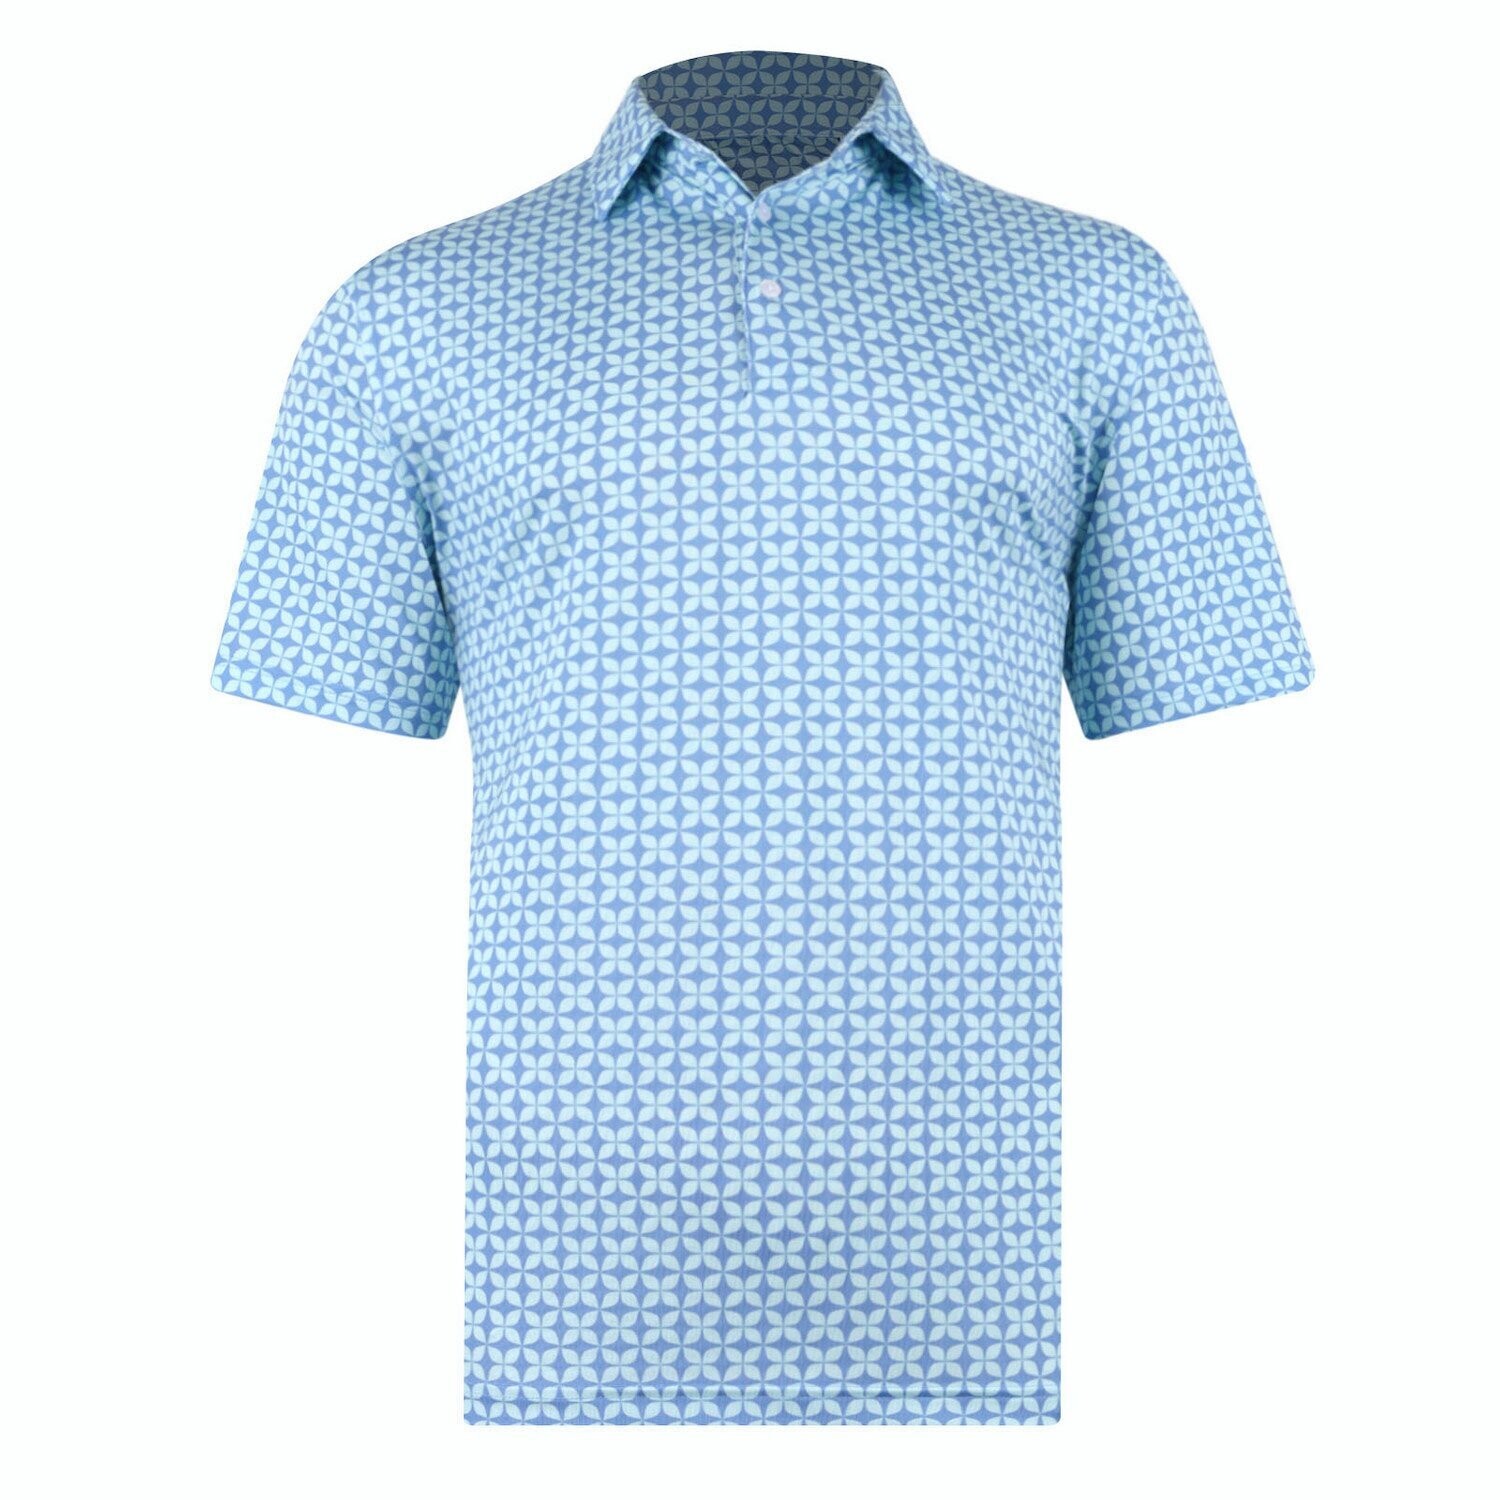 The Chill Print Polo